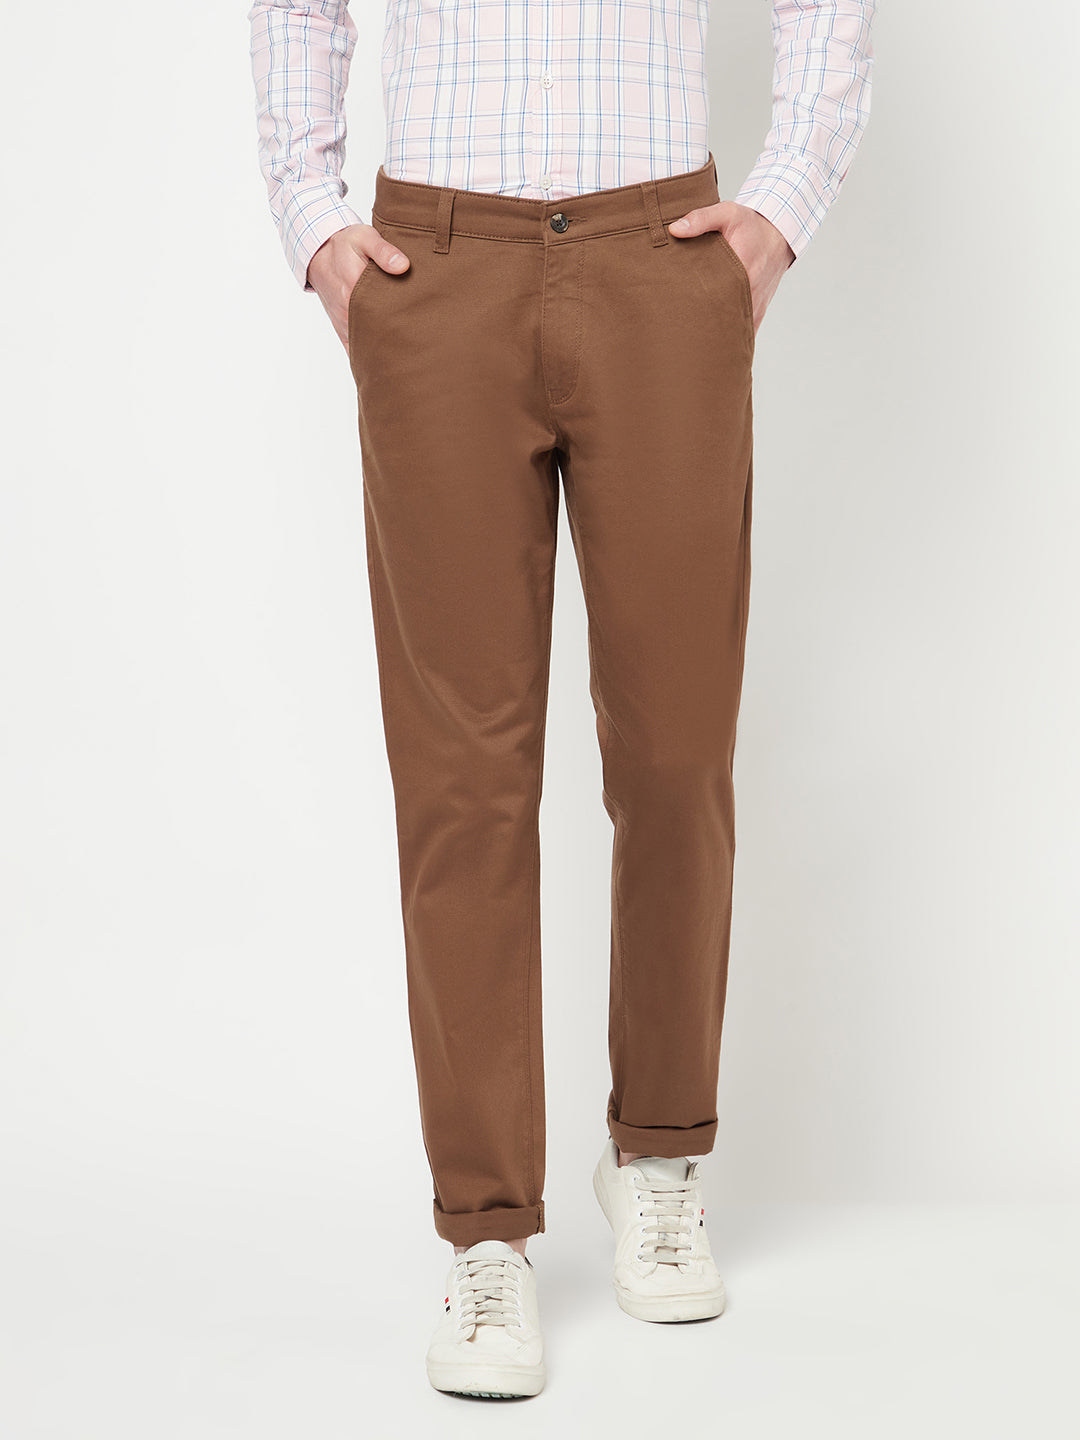 Brown Casual Trousers - Men Trousers